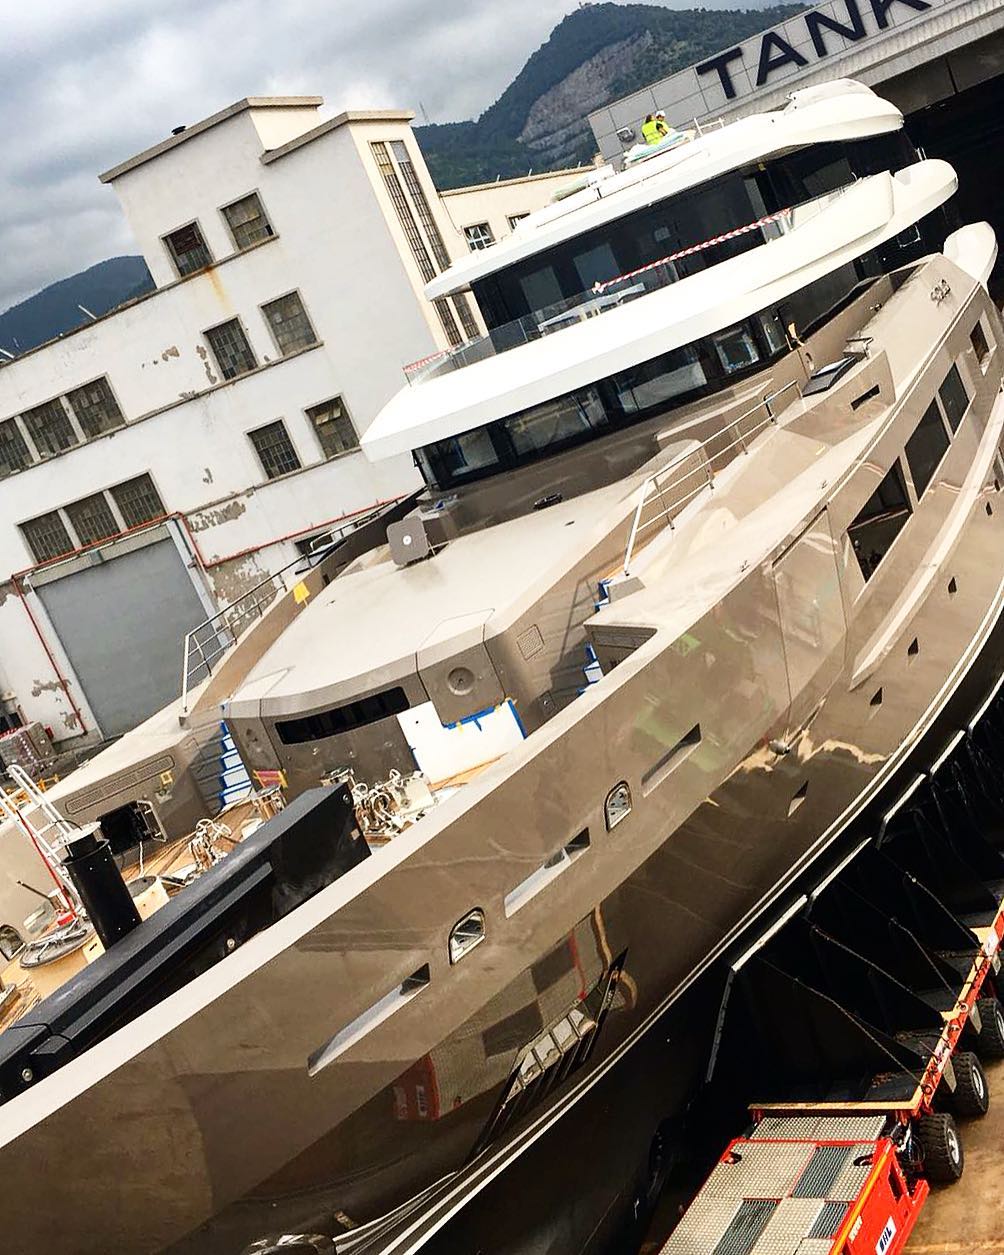 Tankoa Superyacht SOLO Approaching Completion